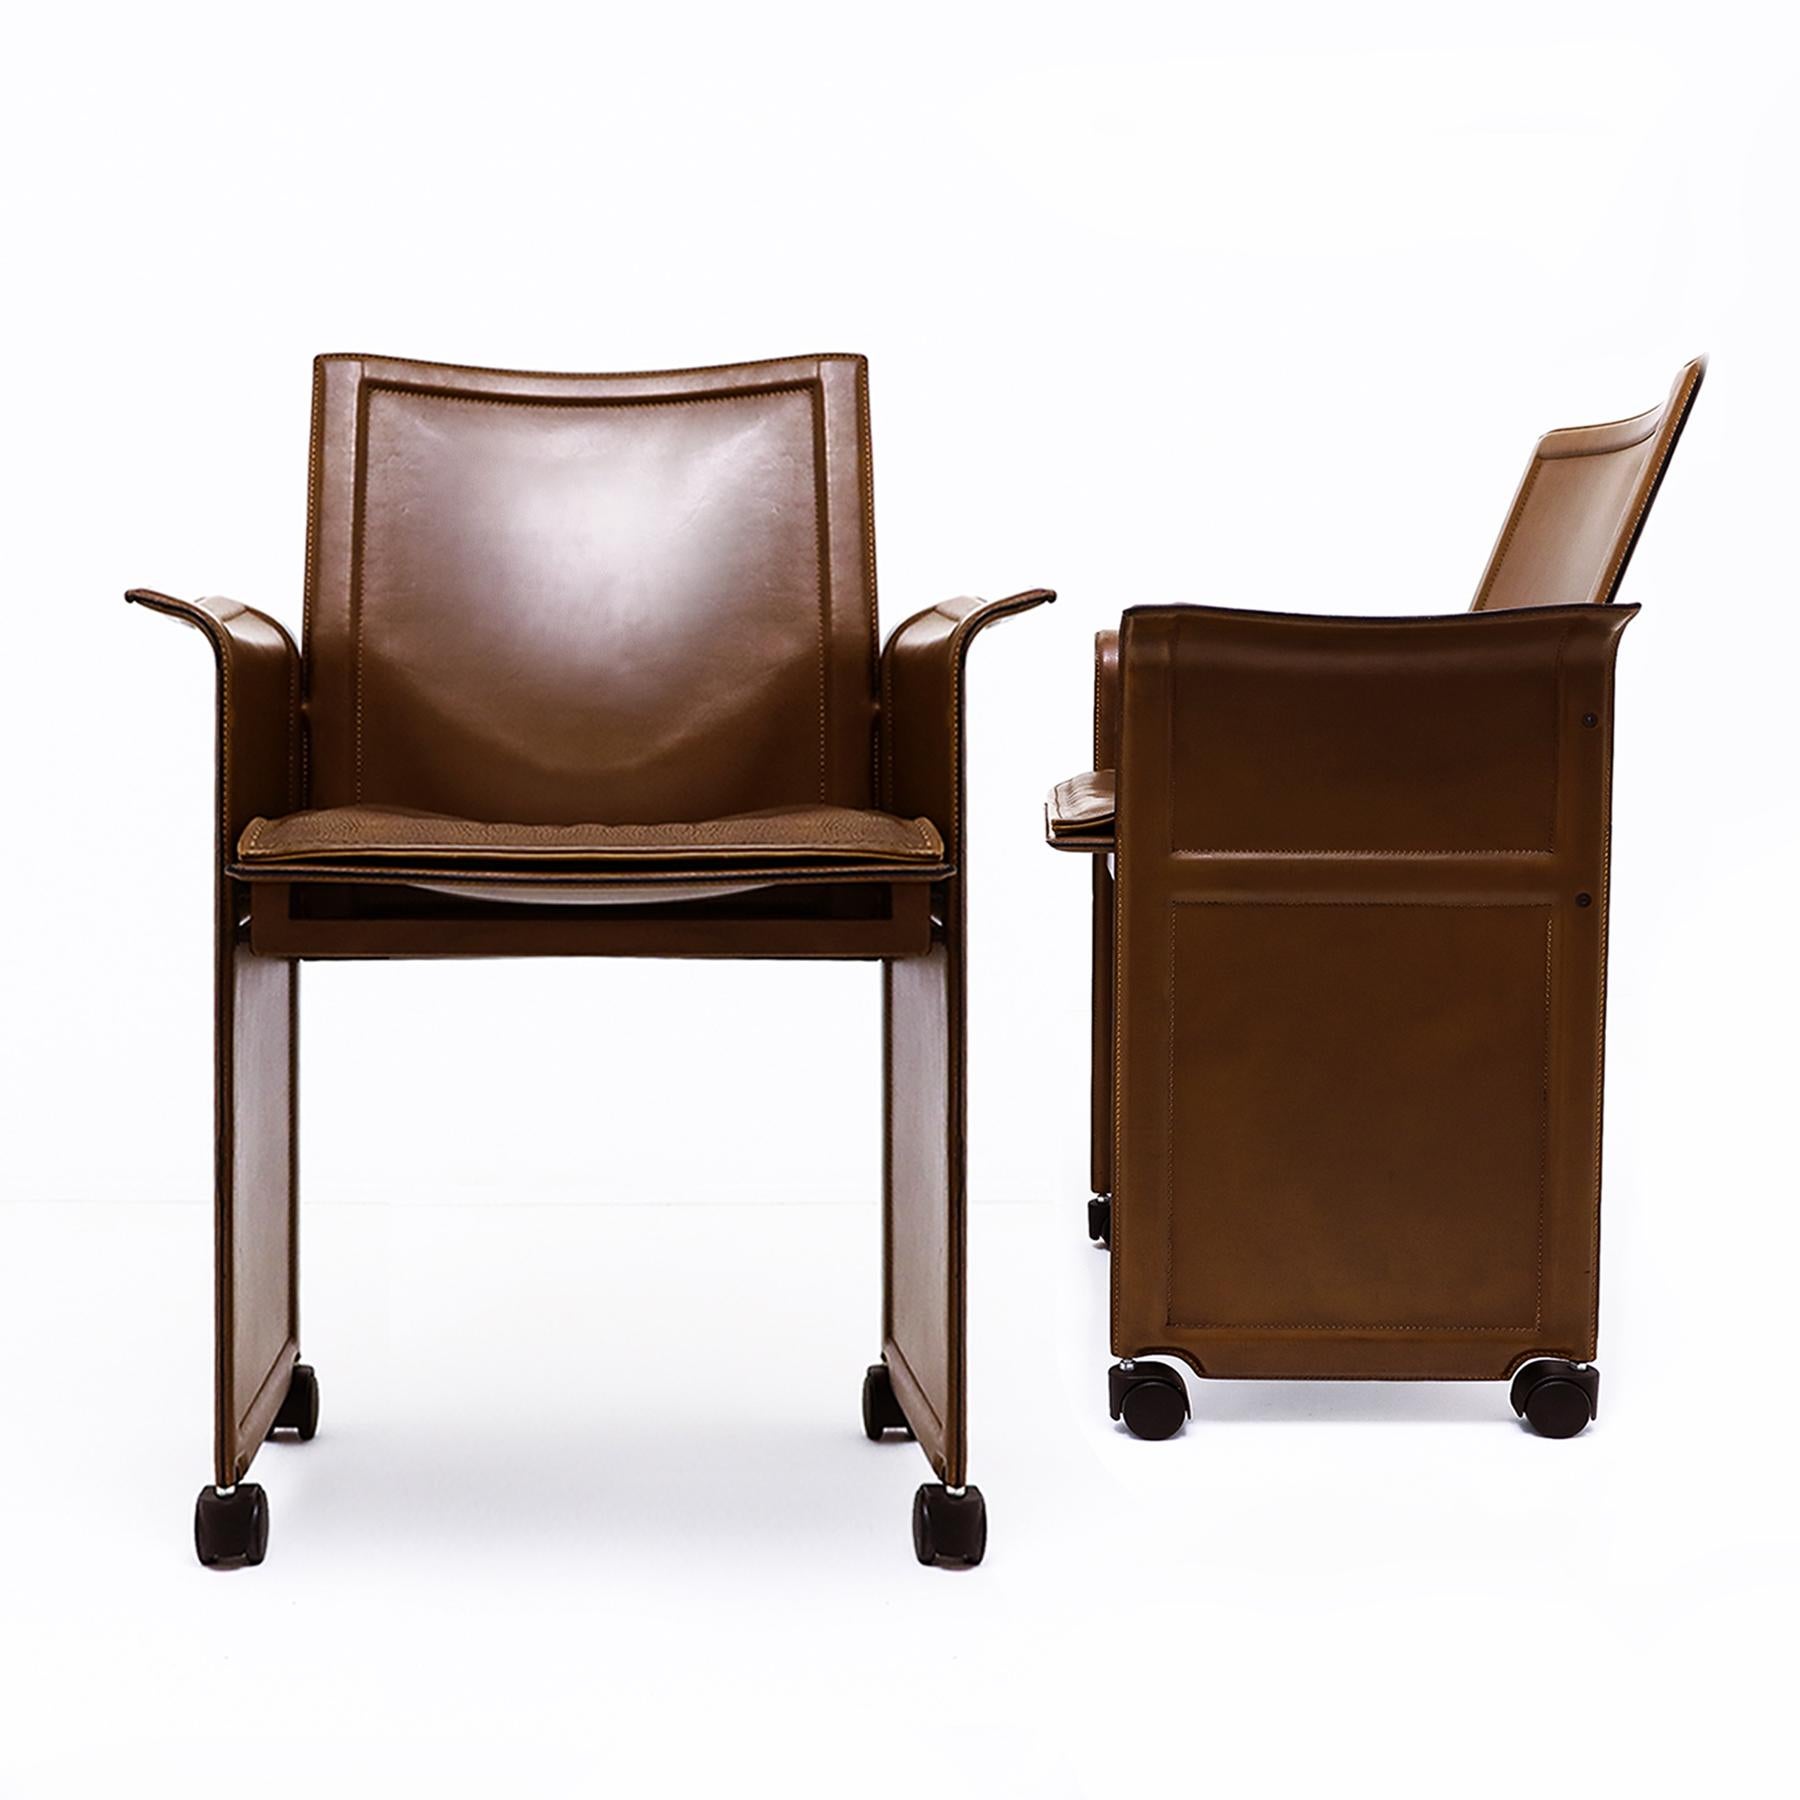 A pair of vintage Italian brown leather Korium armchairs with a steel frame on black castors, designed by Tito Agnoli for Matteo Grassi, 1980s – the price is for both chairs.

This pair of chairs date from the 1980s and were part of series of